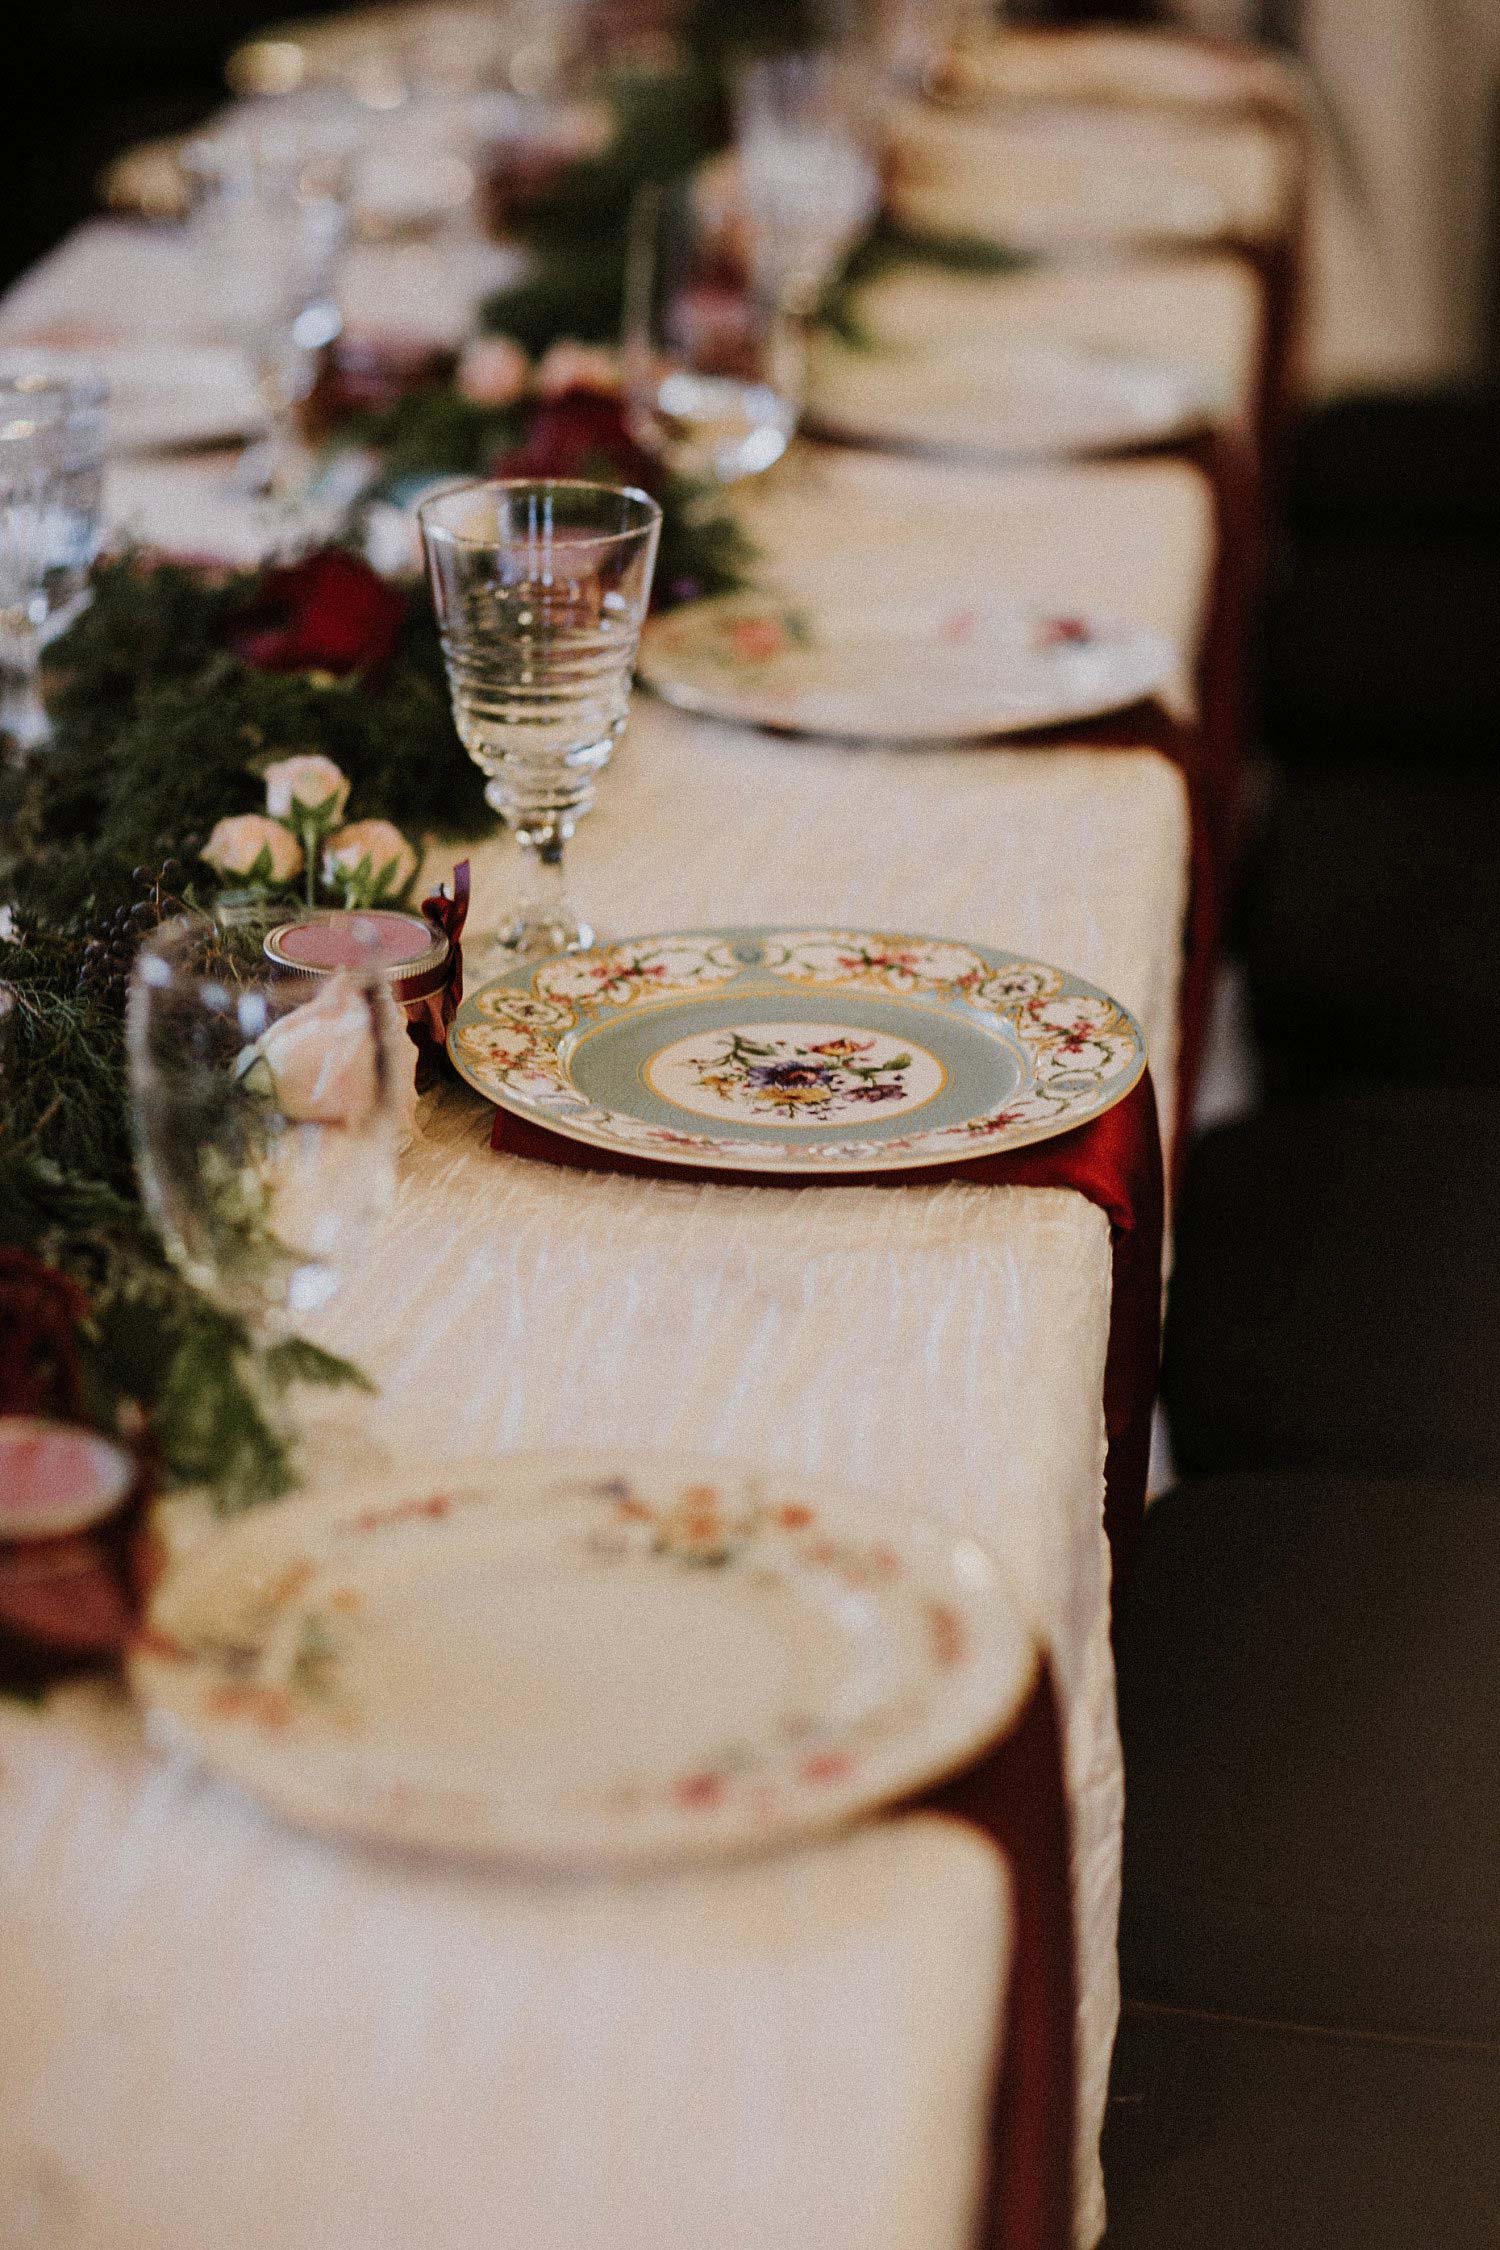 Hollow Hill Farm Event Center Wedding table with vintage china and red napkins